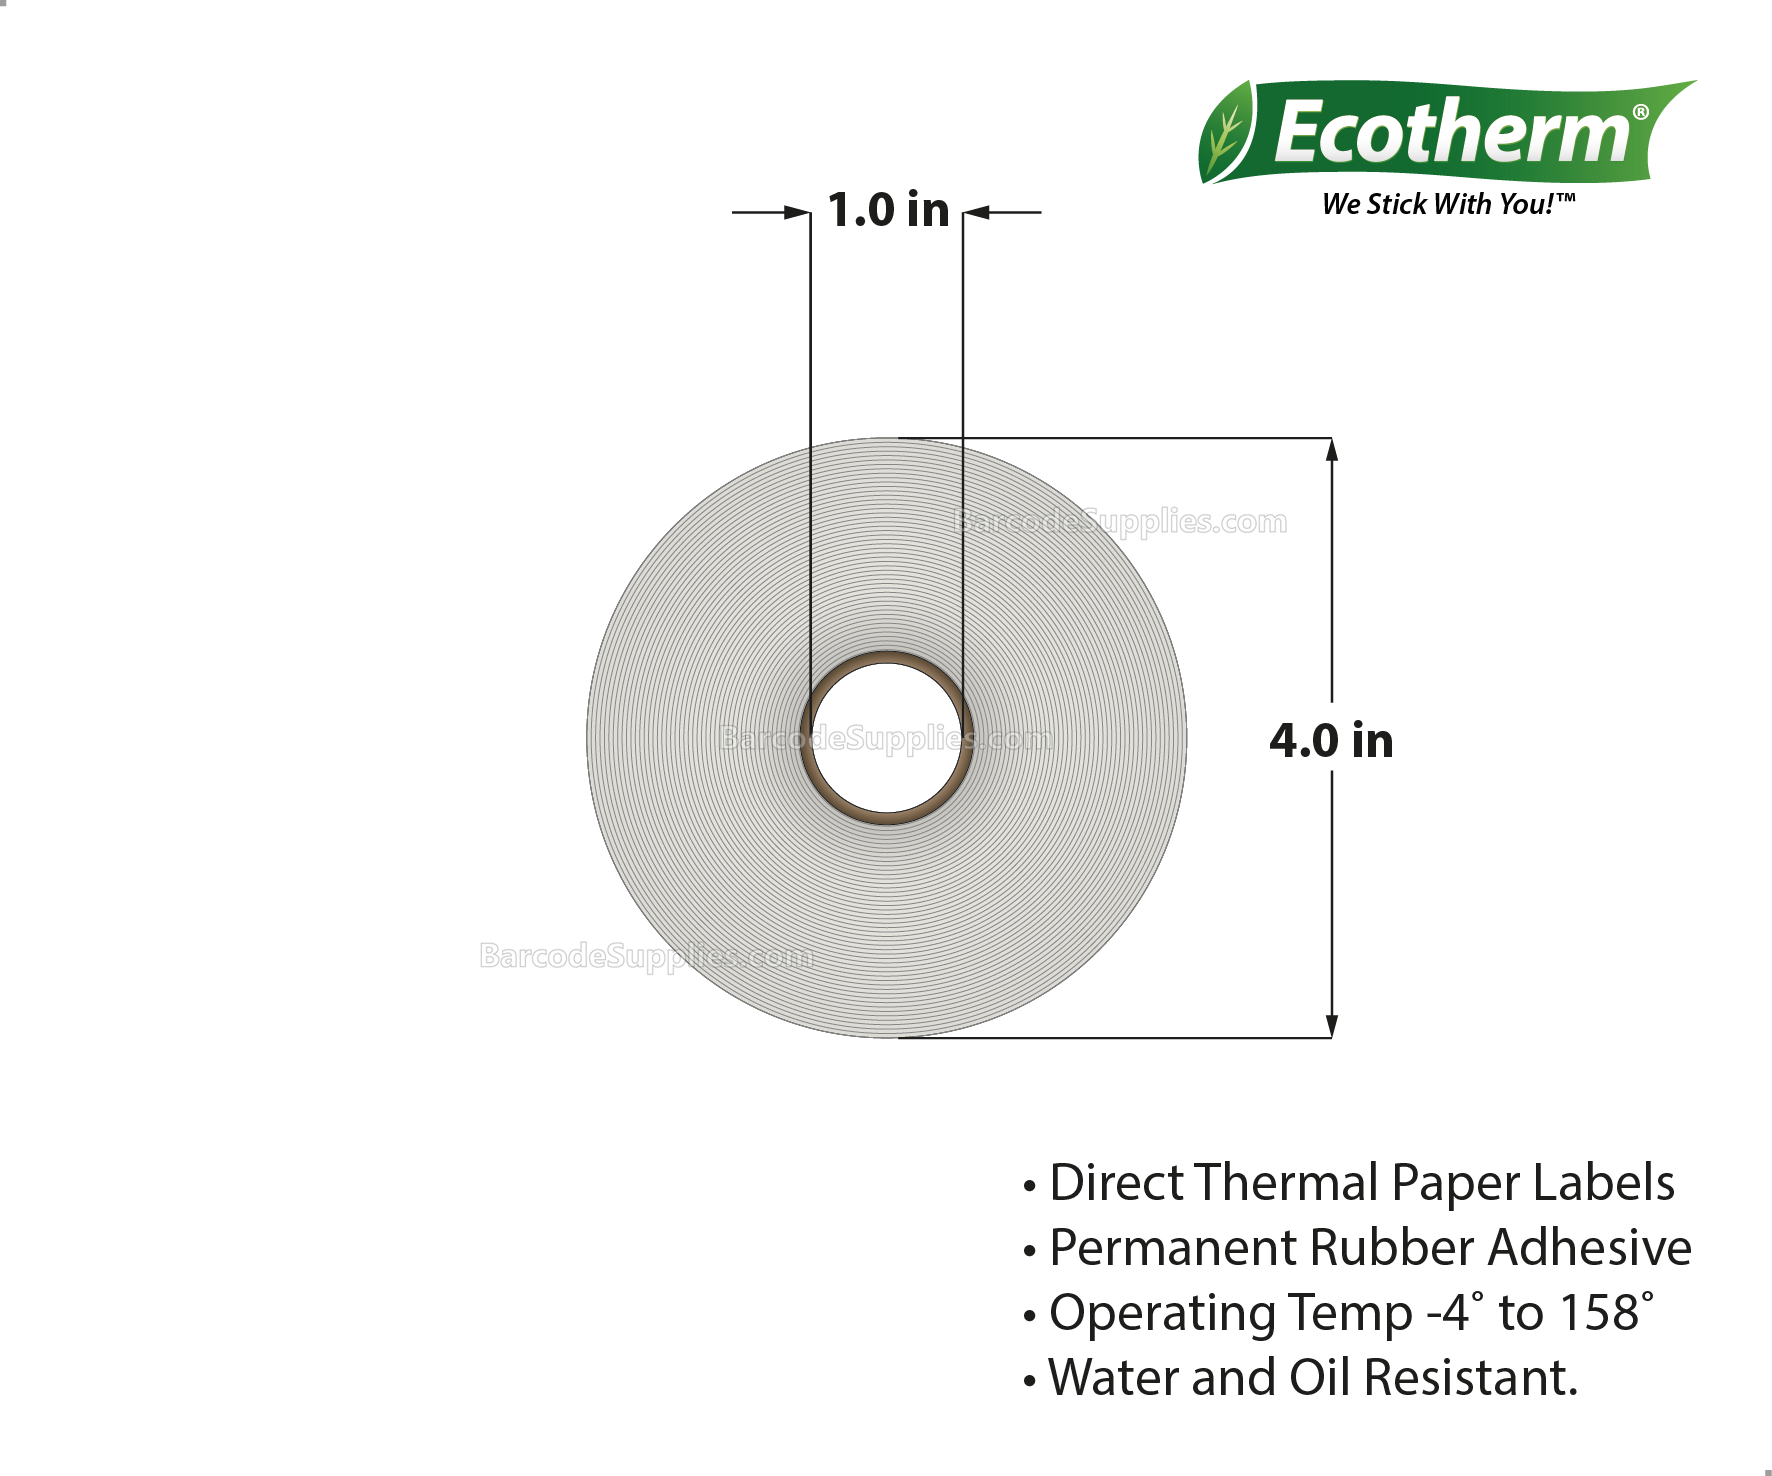 1.5 x 1 Direct Thermal White Labels With Rubber Adhesive - Perforated - 1325 Labels Per Roll - Carton Of 4 Rolls - 5300 Labels Total - MPN: ECOTHERM14119-4